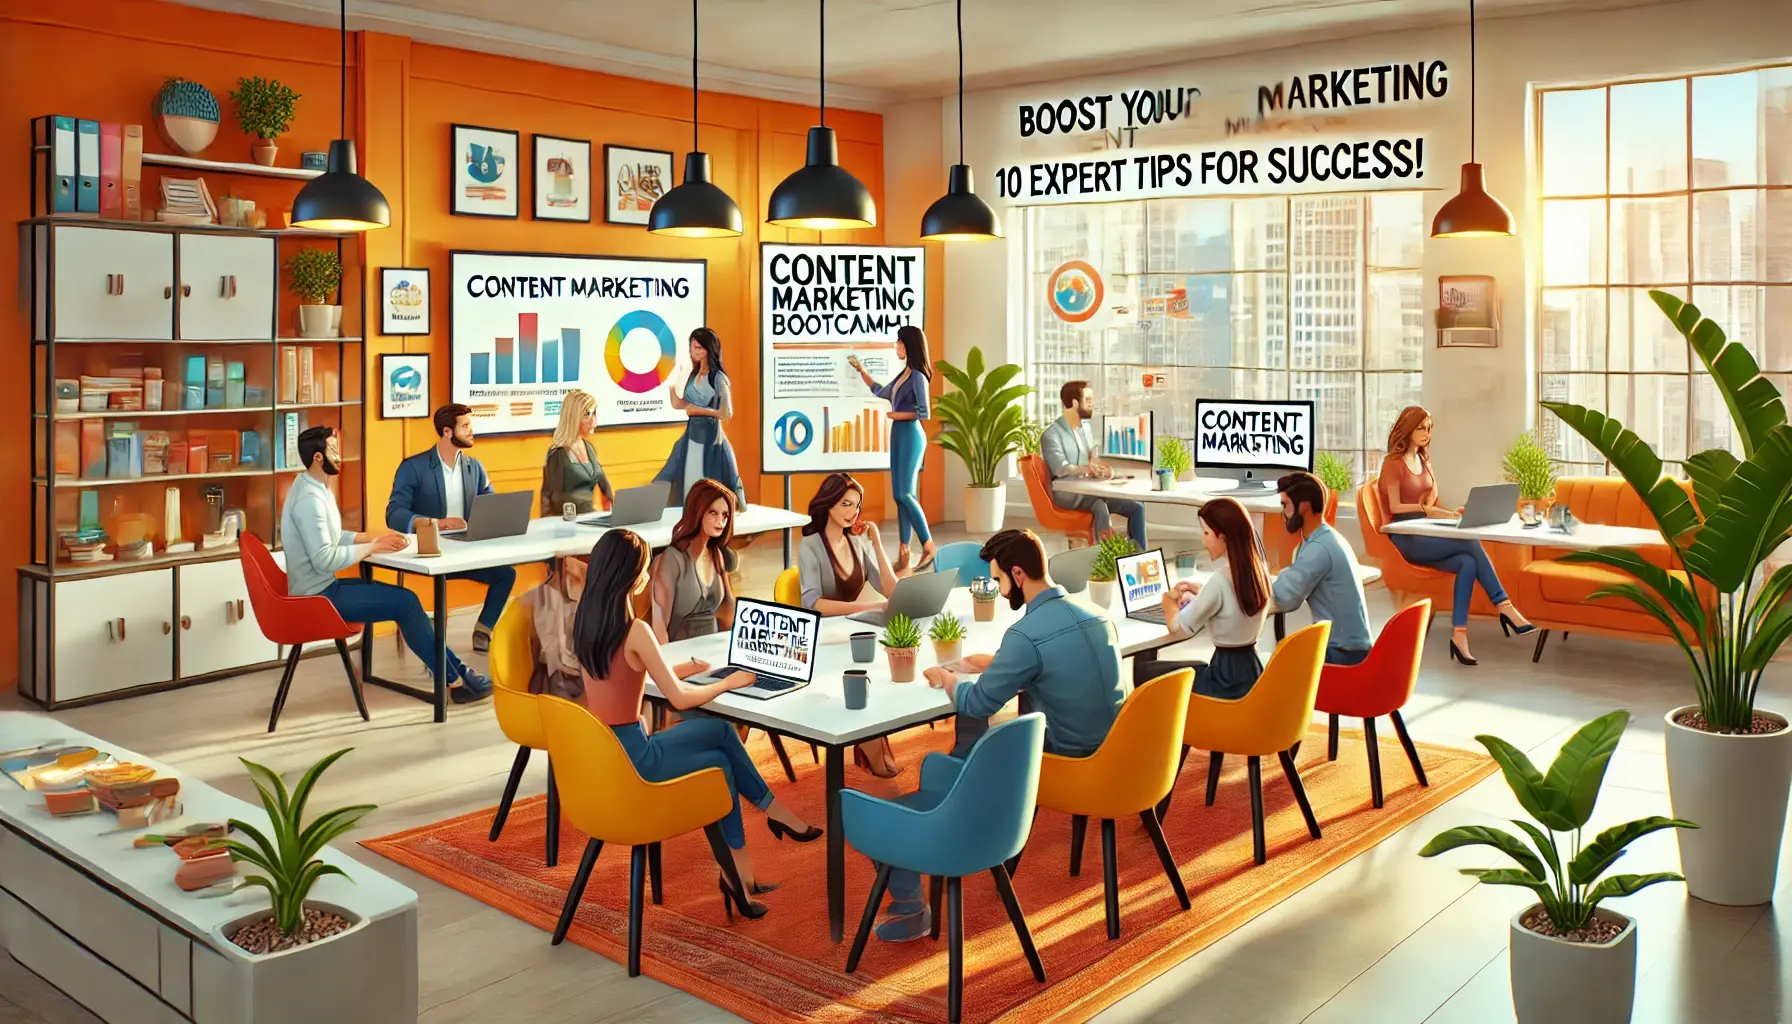 Boost Your Content Marketing: 10 Expert Tips for Success!